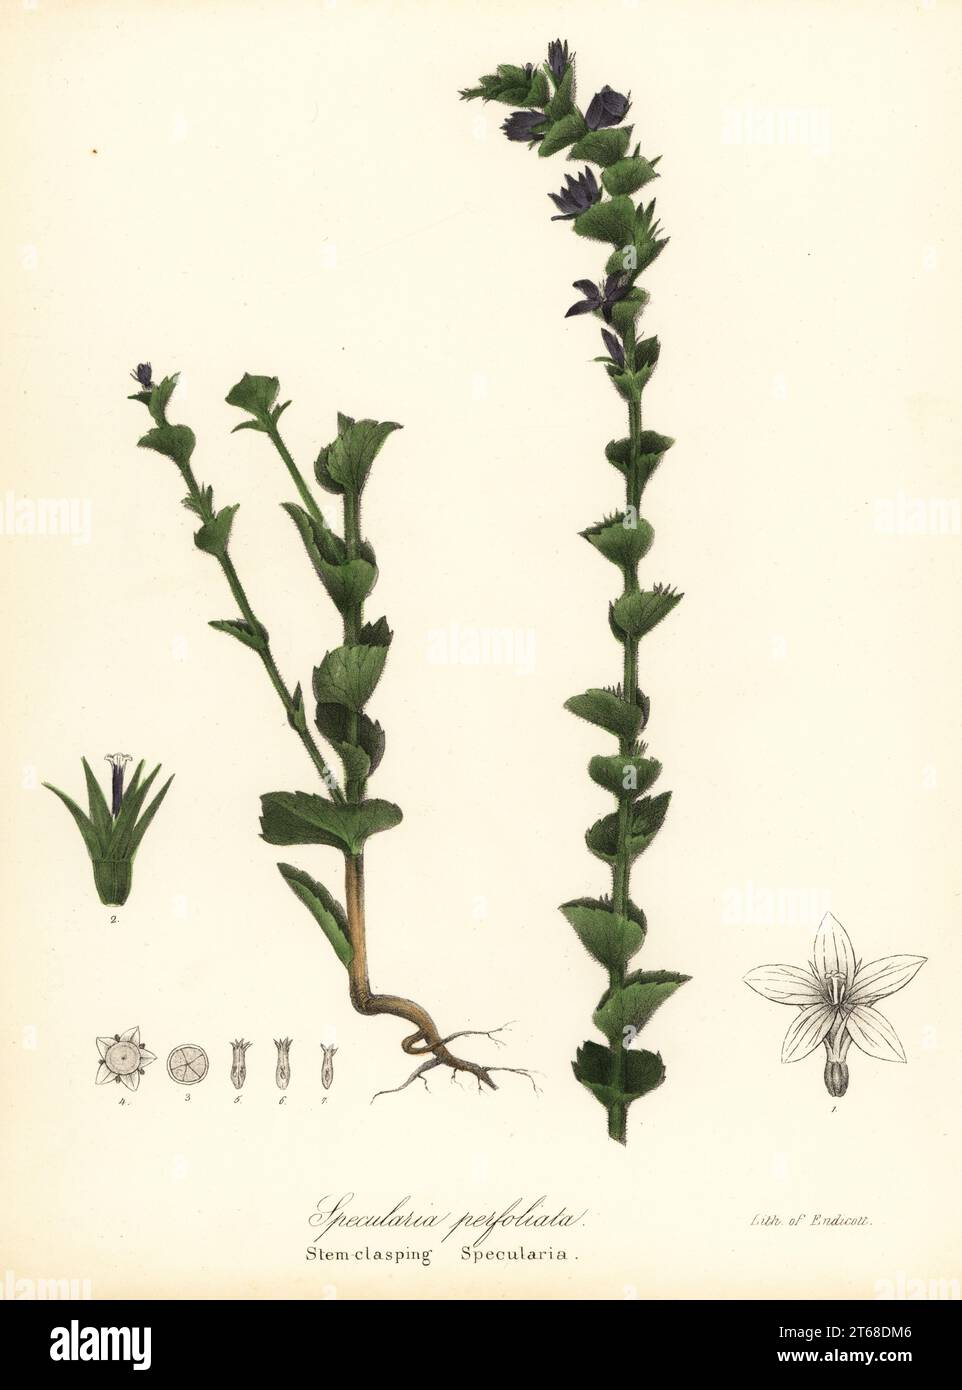 Clasping Venus' looking-glass or clasping bellflower, Triodanis perfoliata (Stem-clasping specularia, Specularia perfoliata). Handcoloured lithograph by Endicott after a botanical illustration from John Torreys A Flora of the State of New York, Carroll and Cook, Albany, 1843. The plates drawn by John Torrey, Agnes Mitchell, Elizabeth Paoley and Swinton. John Torrey was an American botanist, chemist and physician 1796-1873. Stock Photo